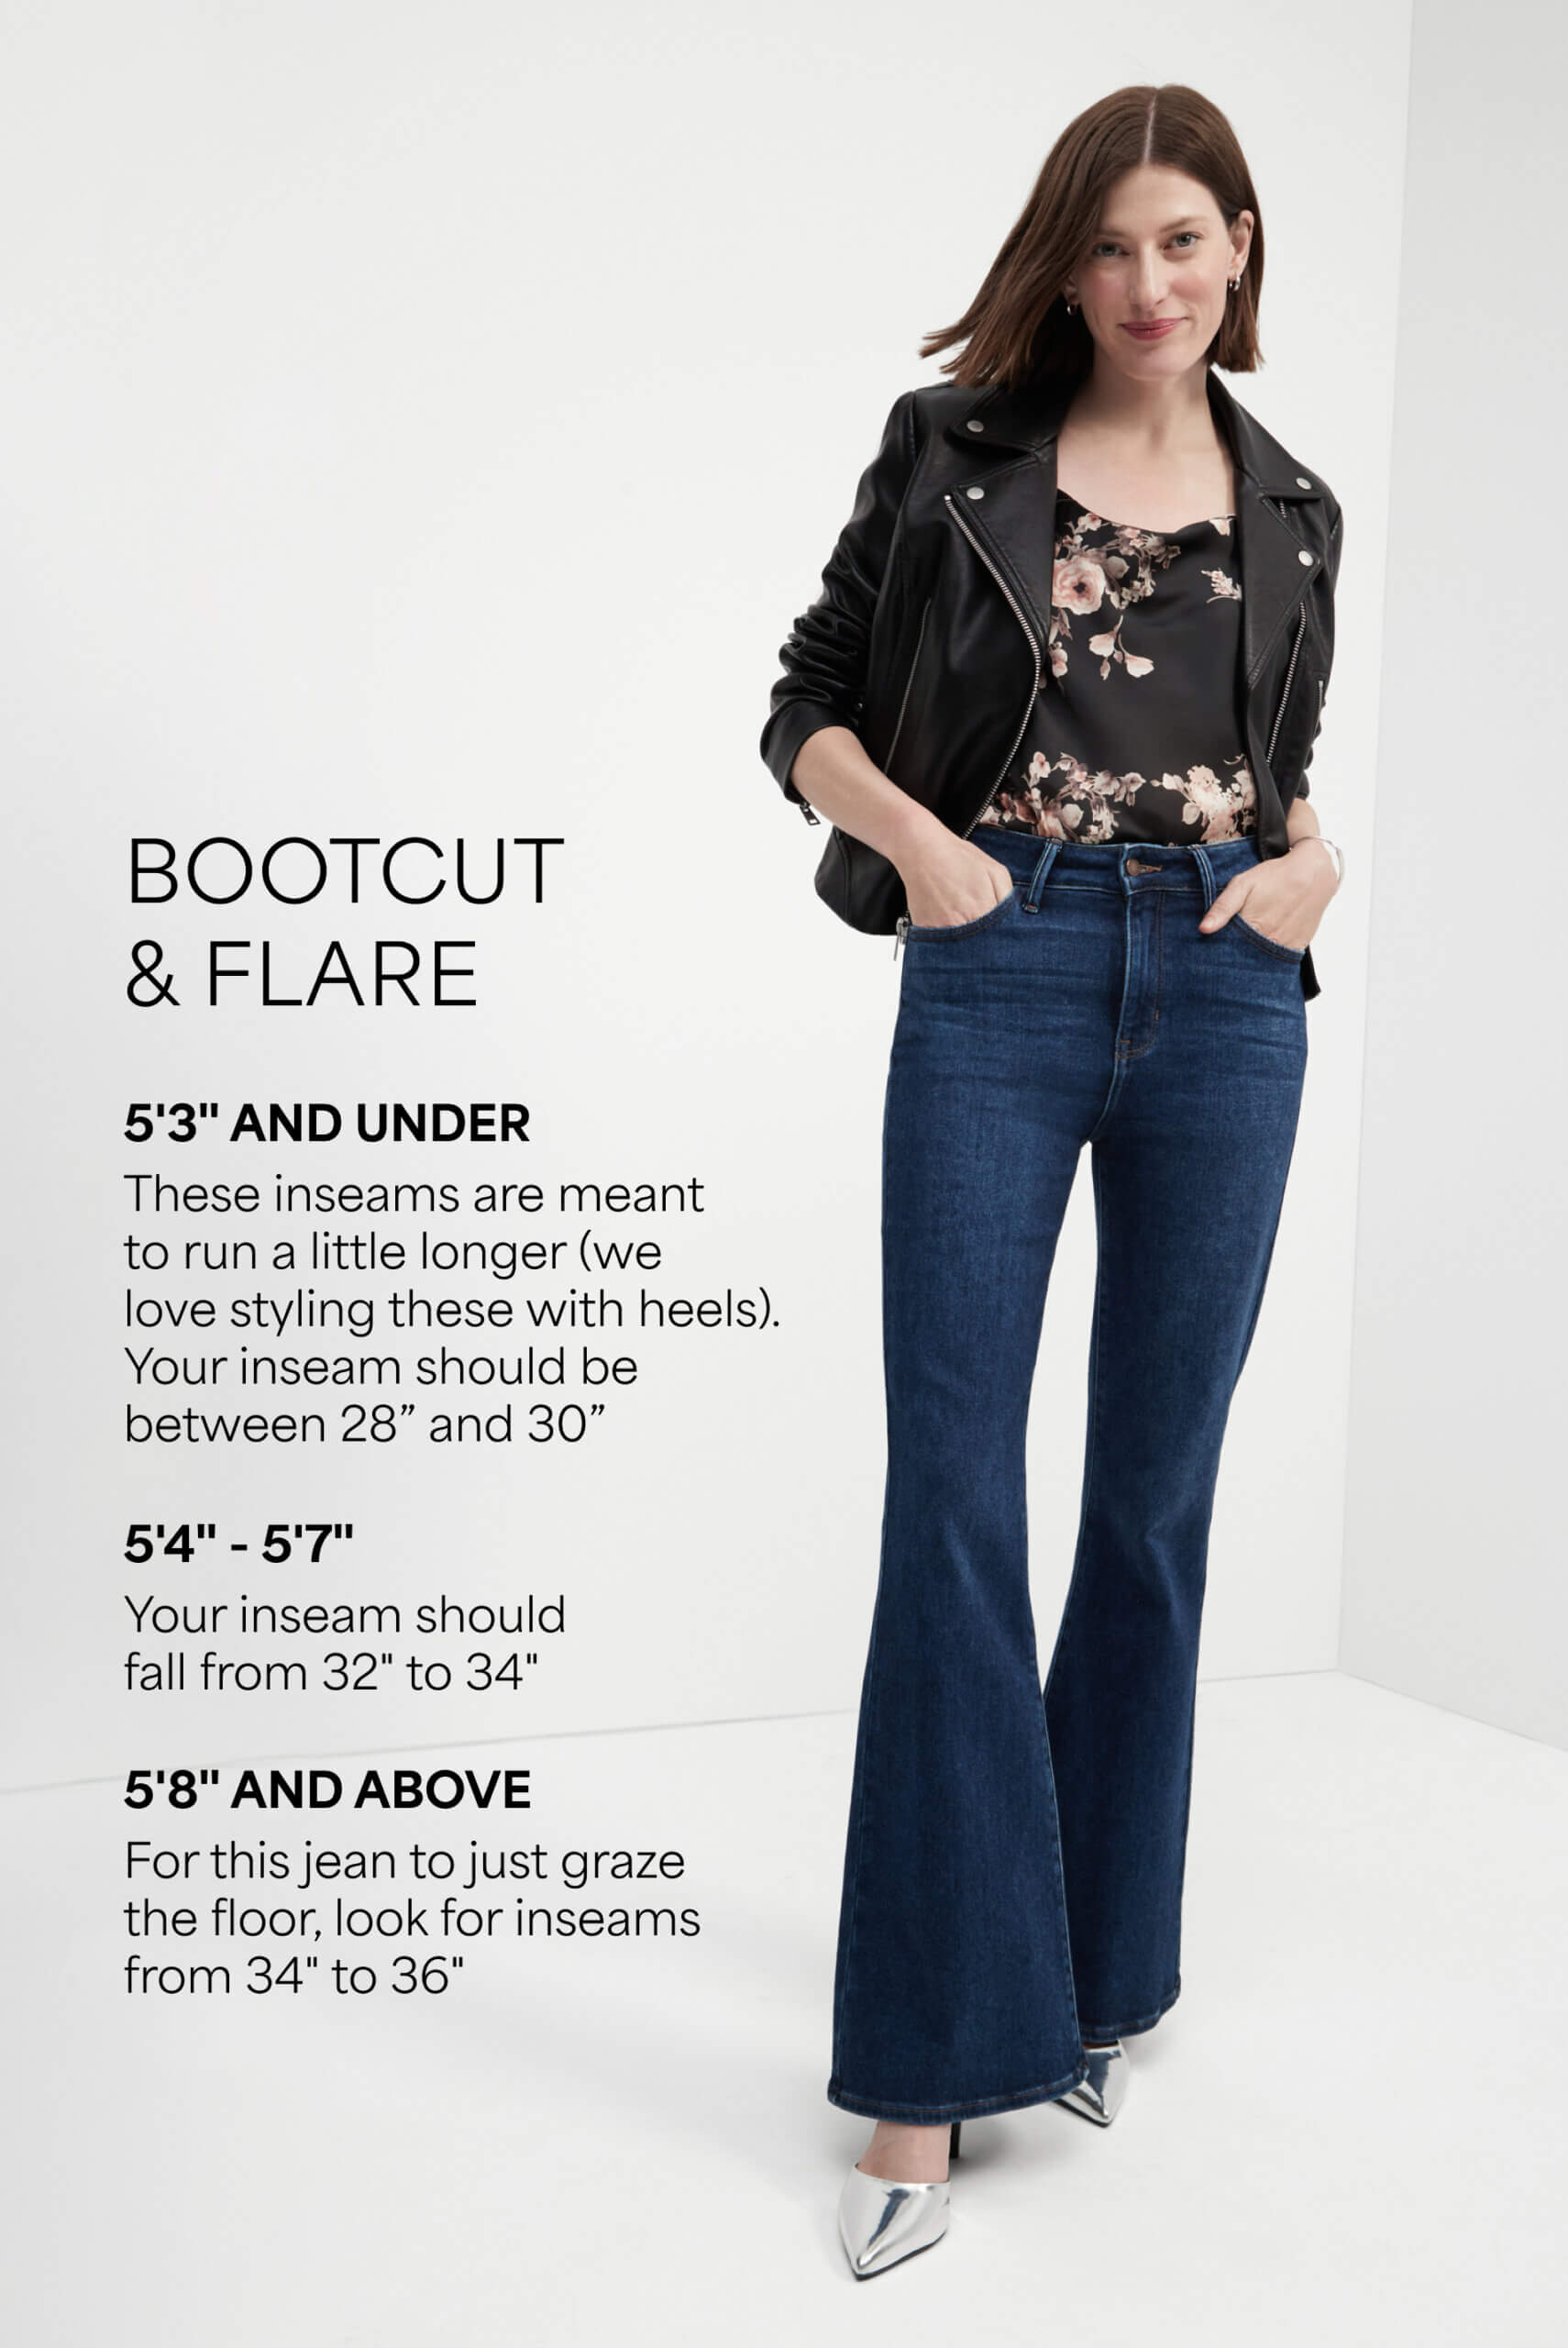 Woman wearing flare jeans with chart of inseams by height 